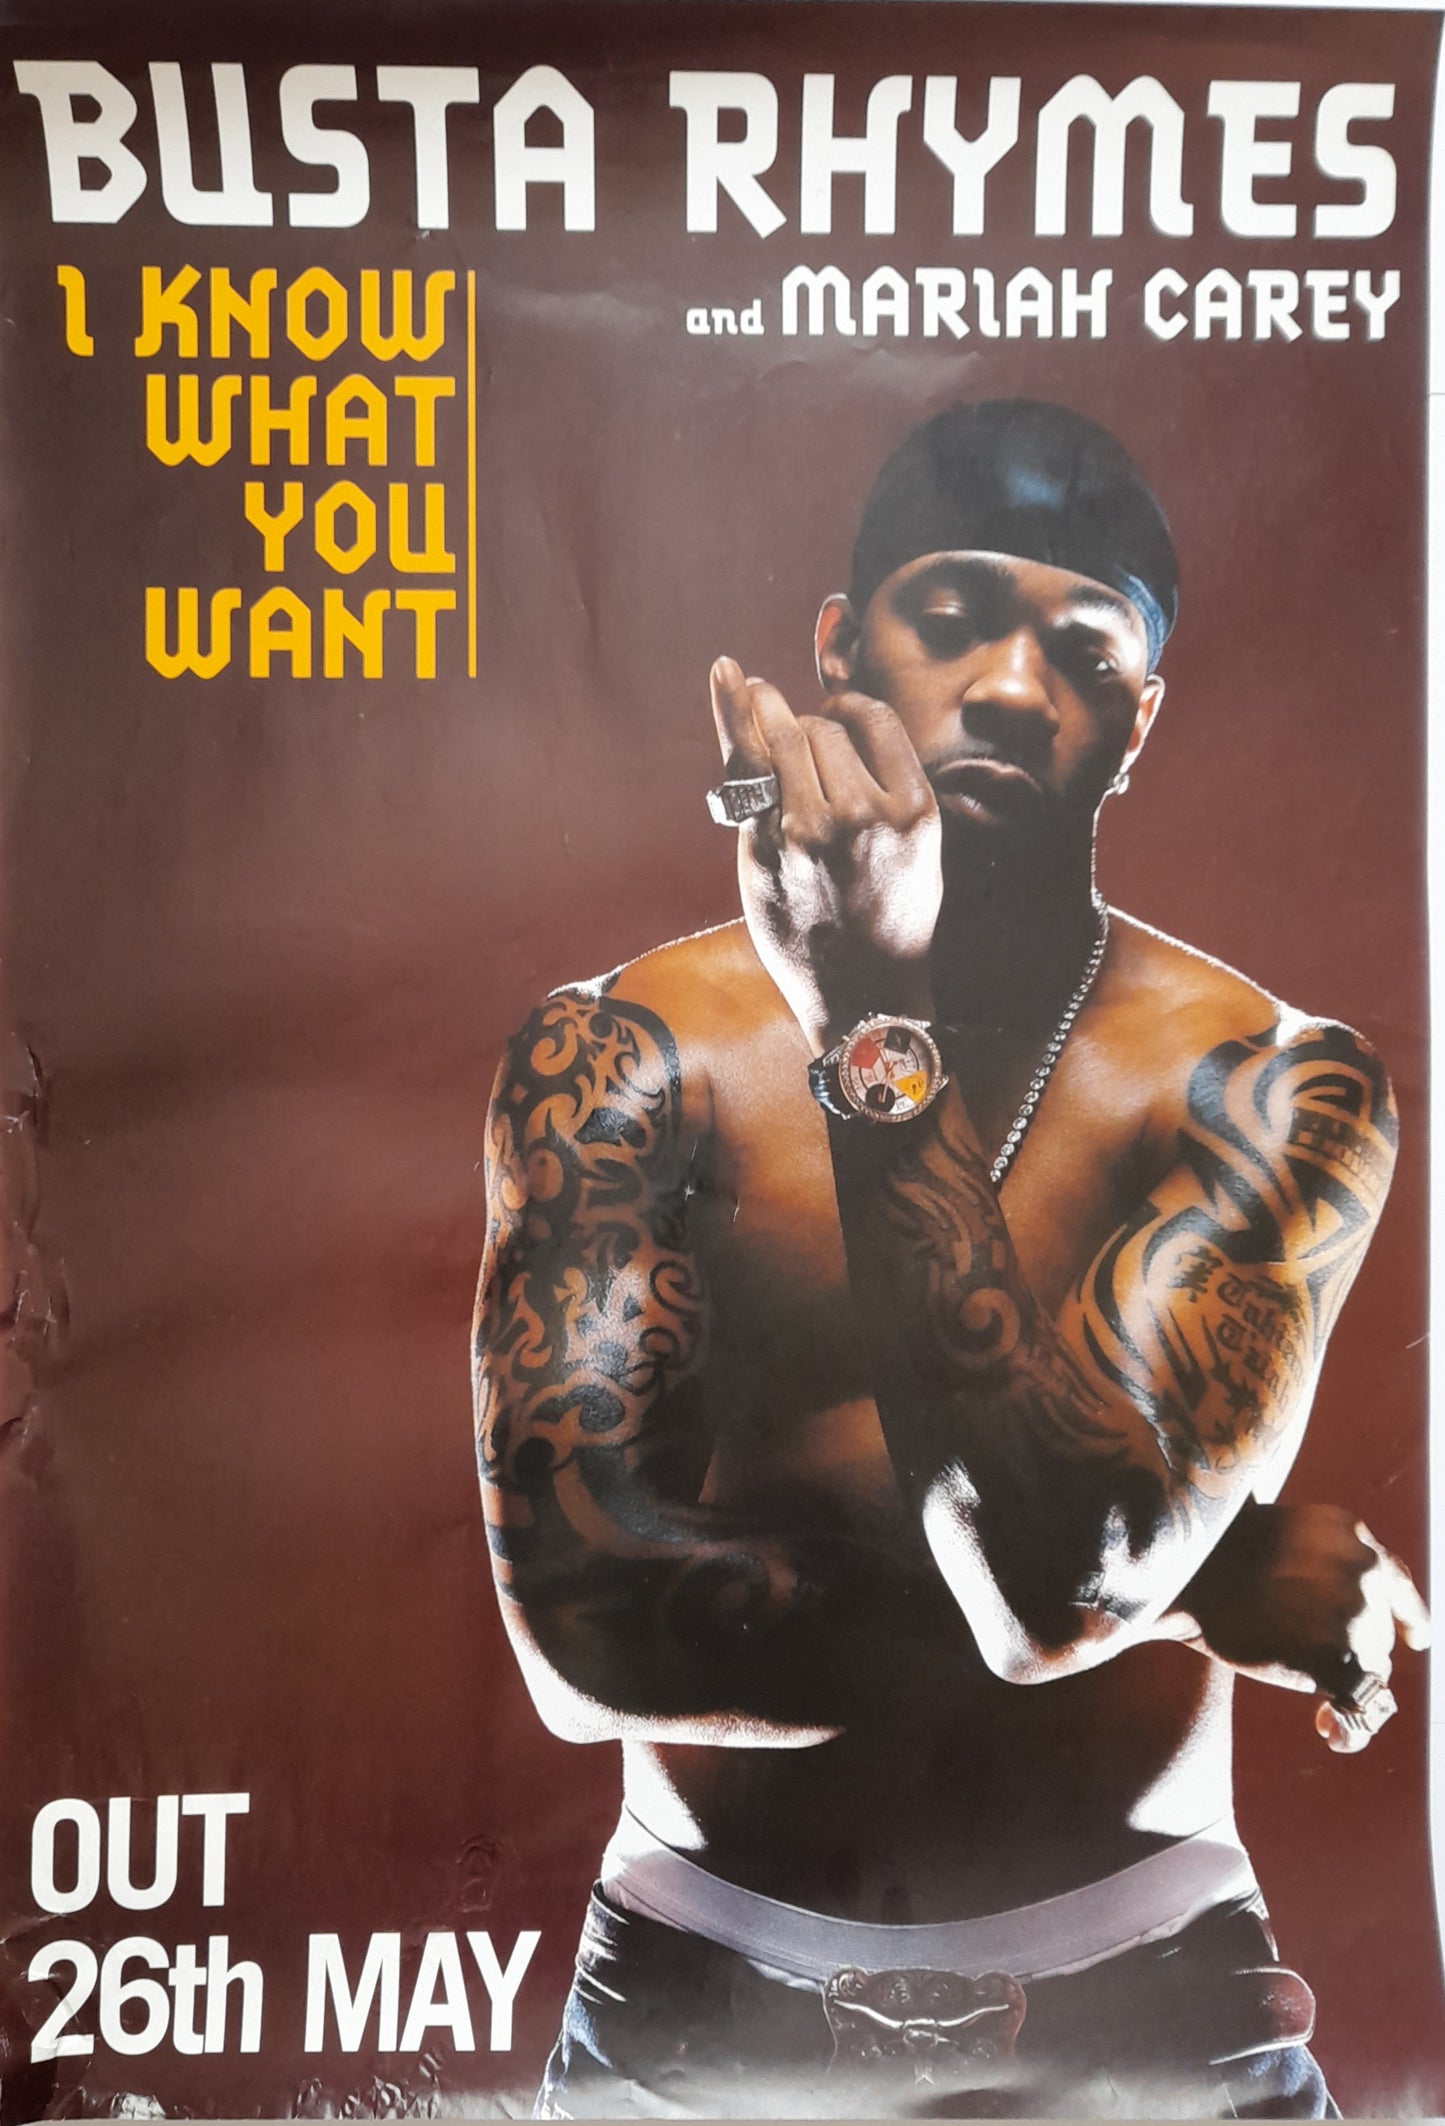 Busta Rhymes & Mariah Carey I know what you want UK Promotional Poster